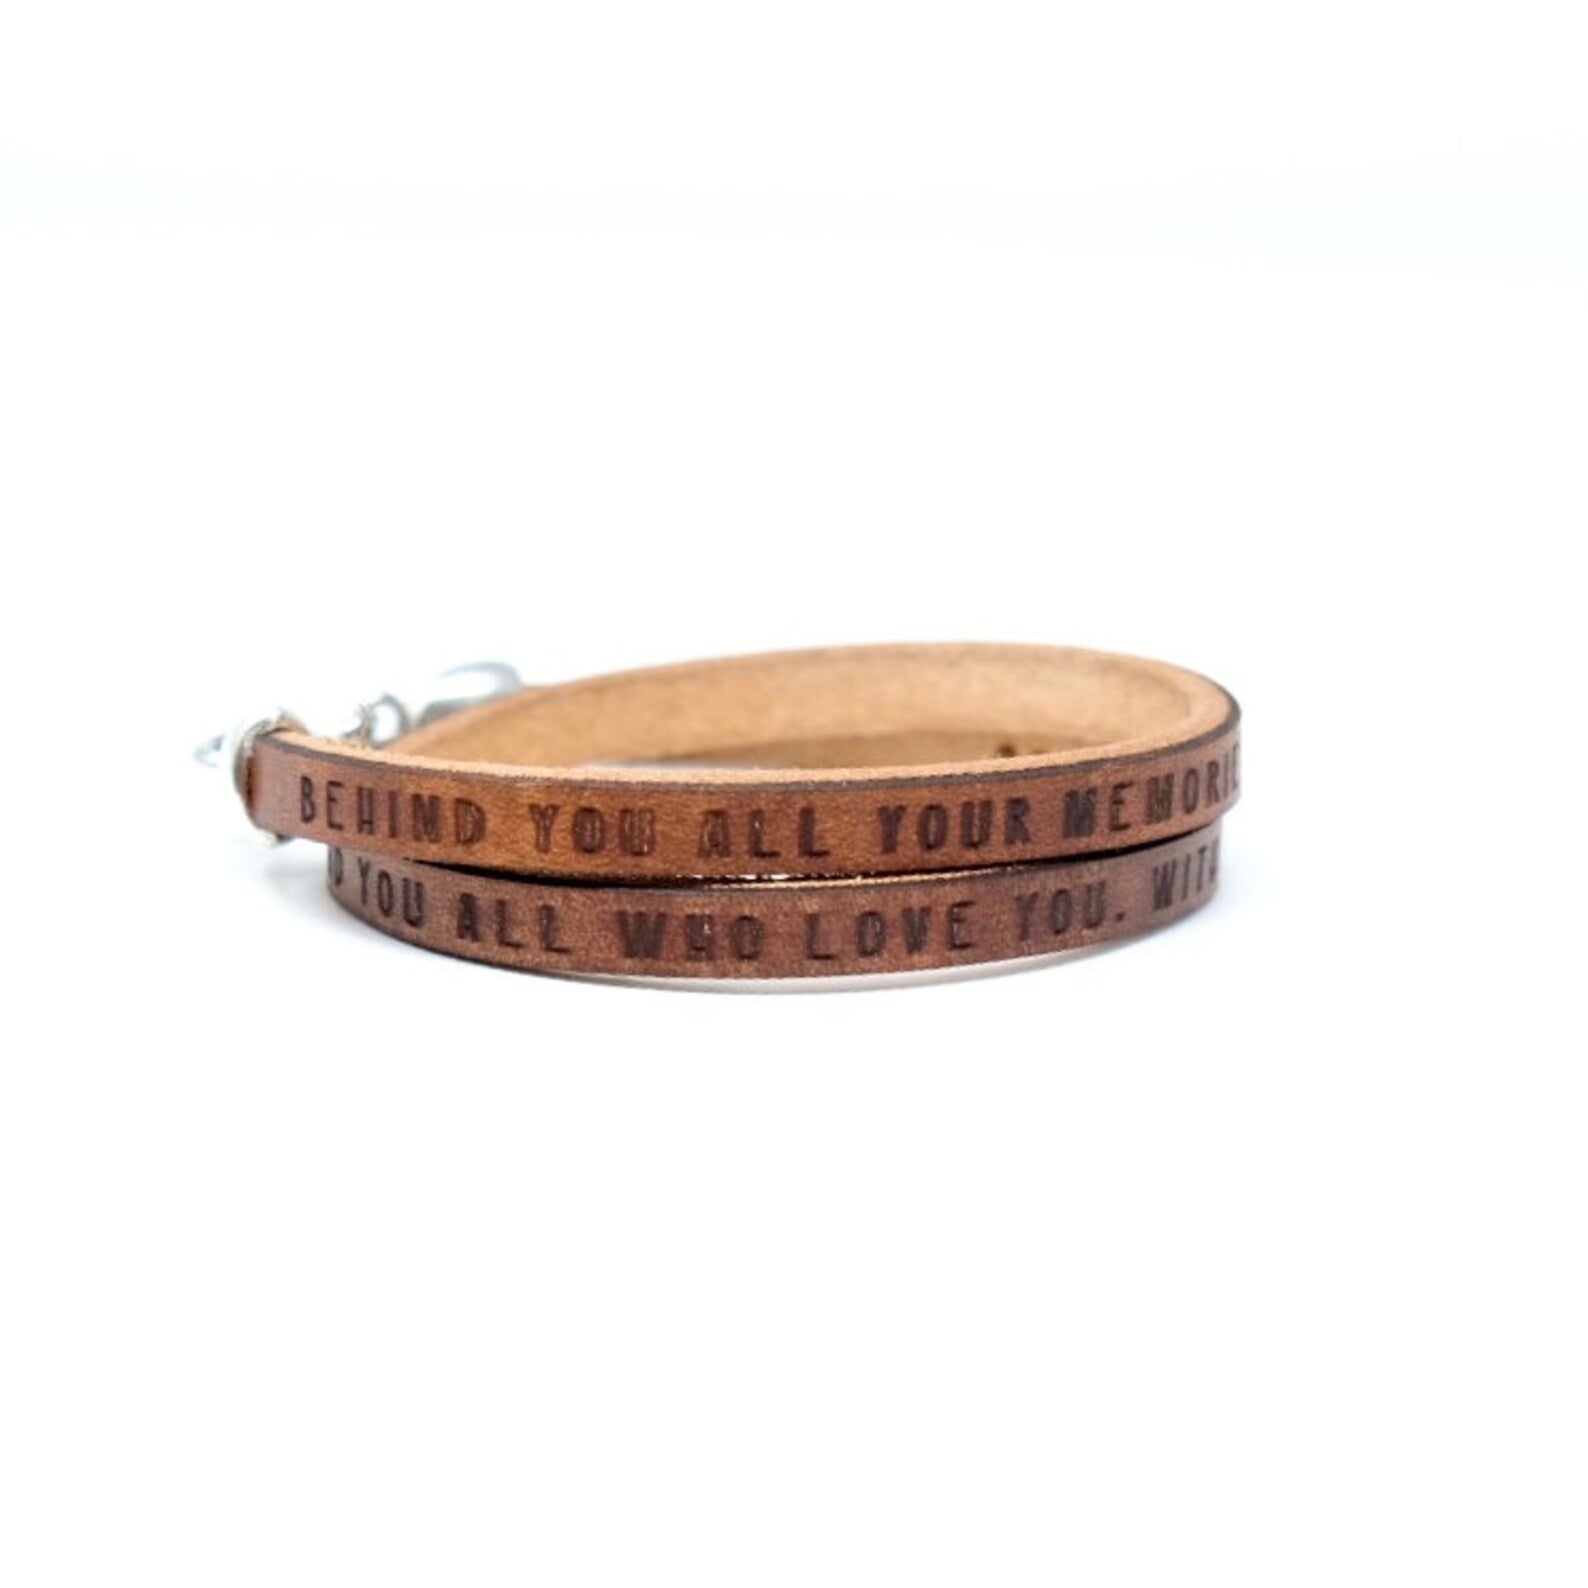 Behind You Are All Your Memories Leather Bracelet